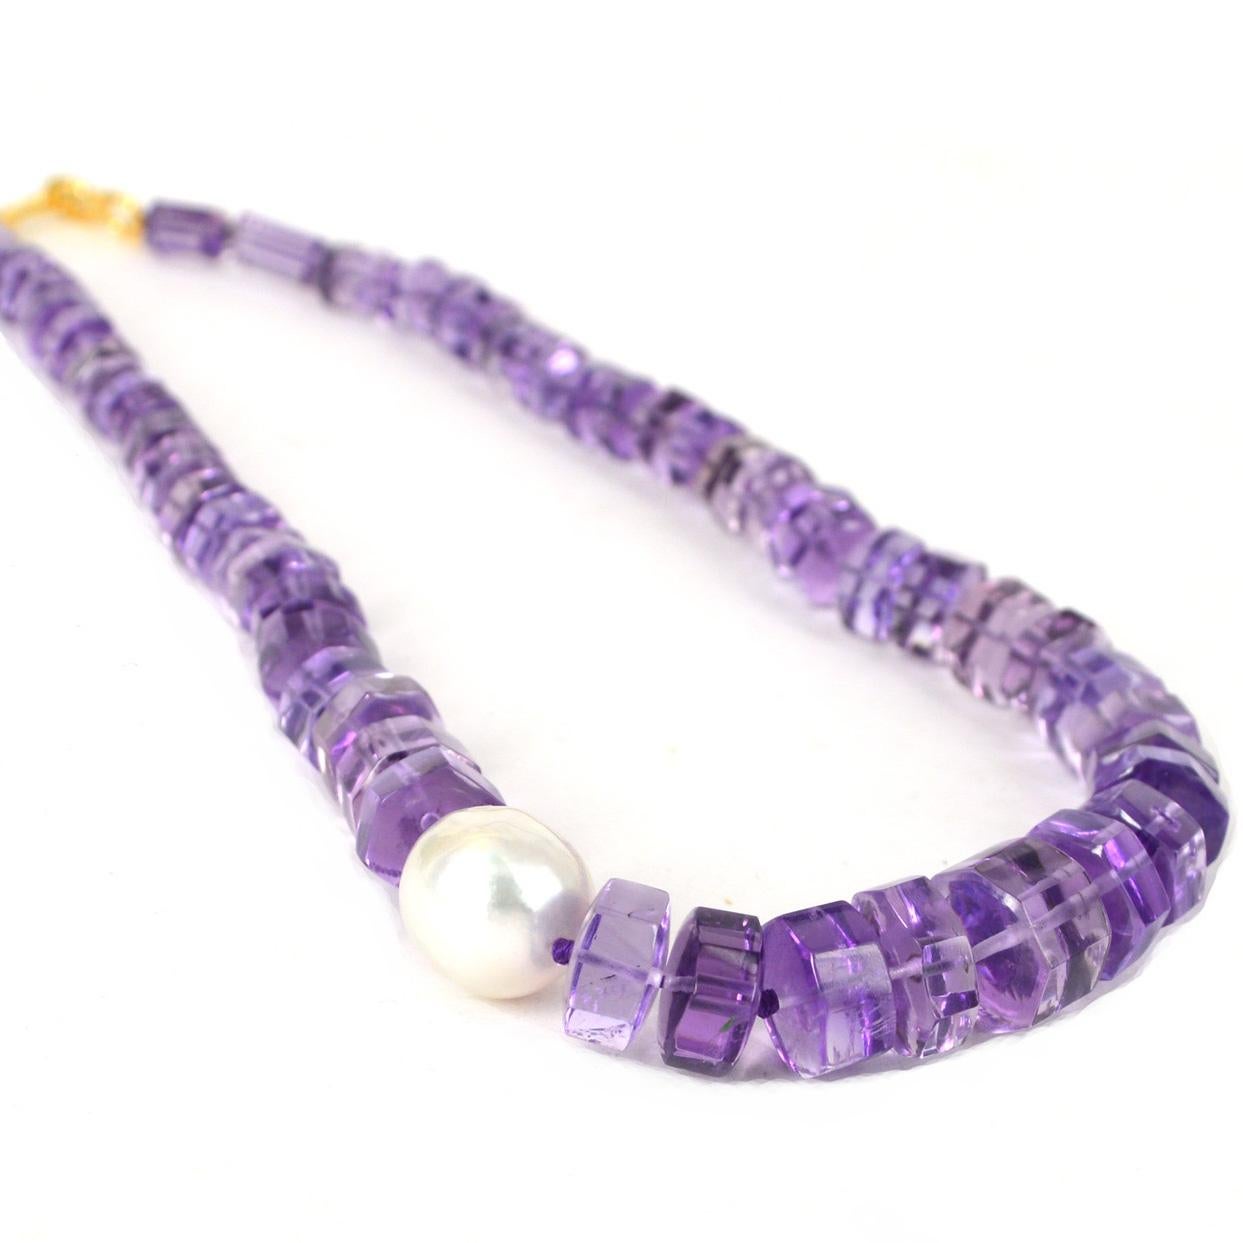 Graduated gem quality Amethyst tubes hand knotted on purple silk thread with a South Sea Pearl. Amethyst tubes measure 6x10mm up to 12x9.7mm the South Sea Pearl measures 13x14mm. Necklace is finished with a 37mm 14k Gold Filled hook clasp.
